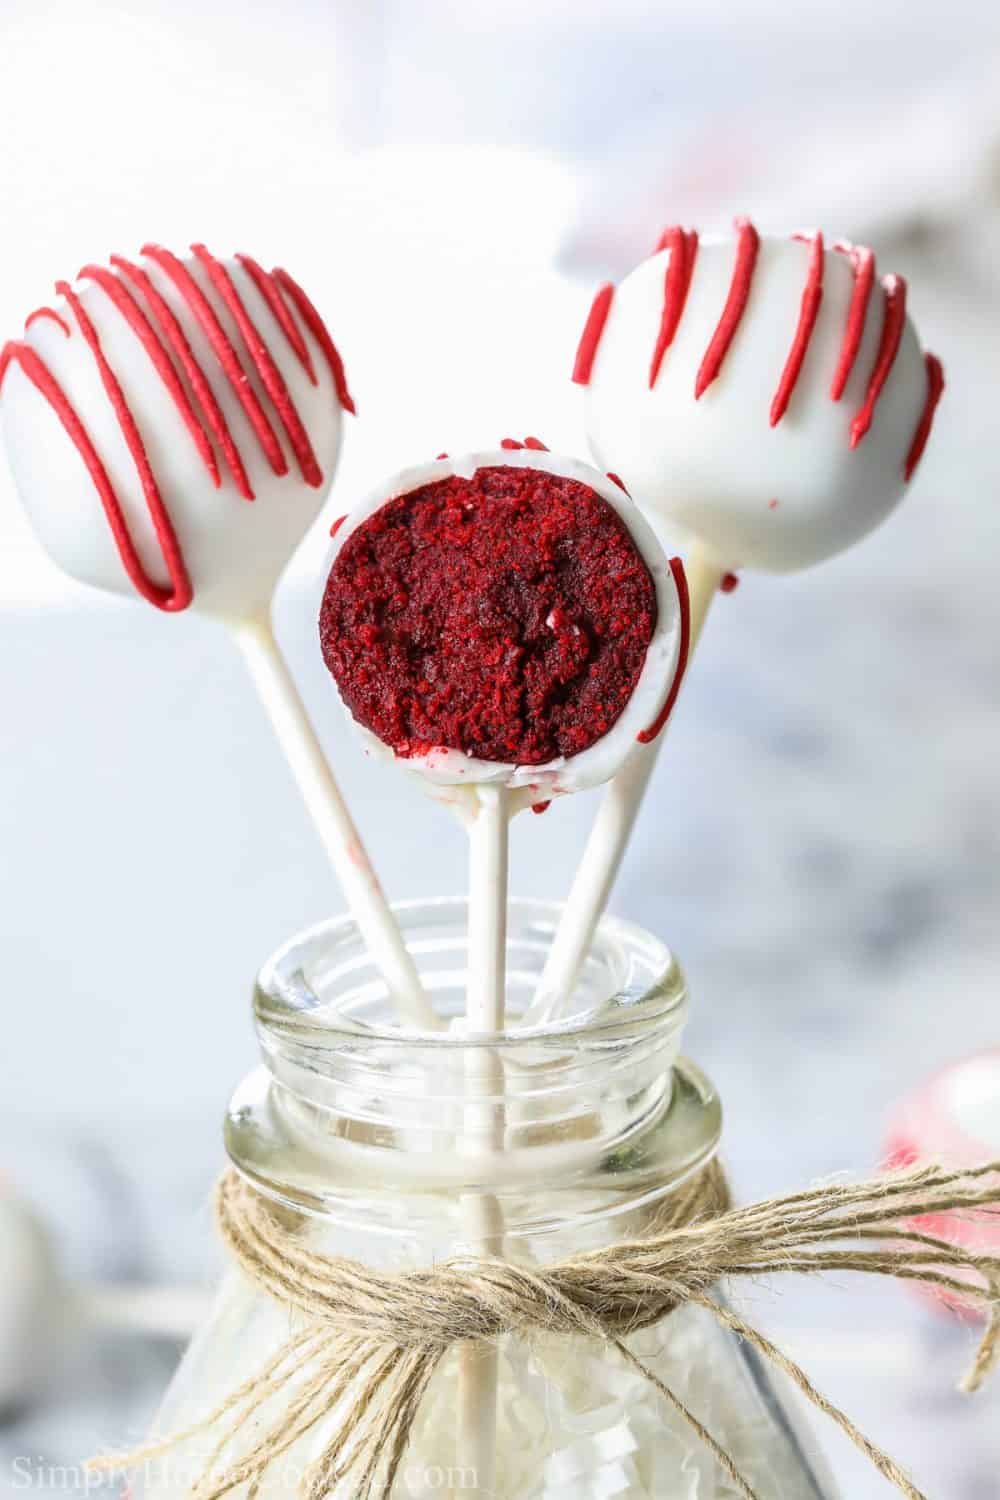 Tips To Make The Best Cake Pops